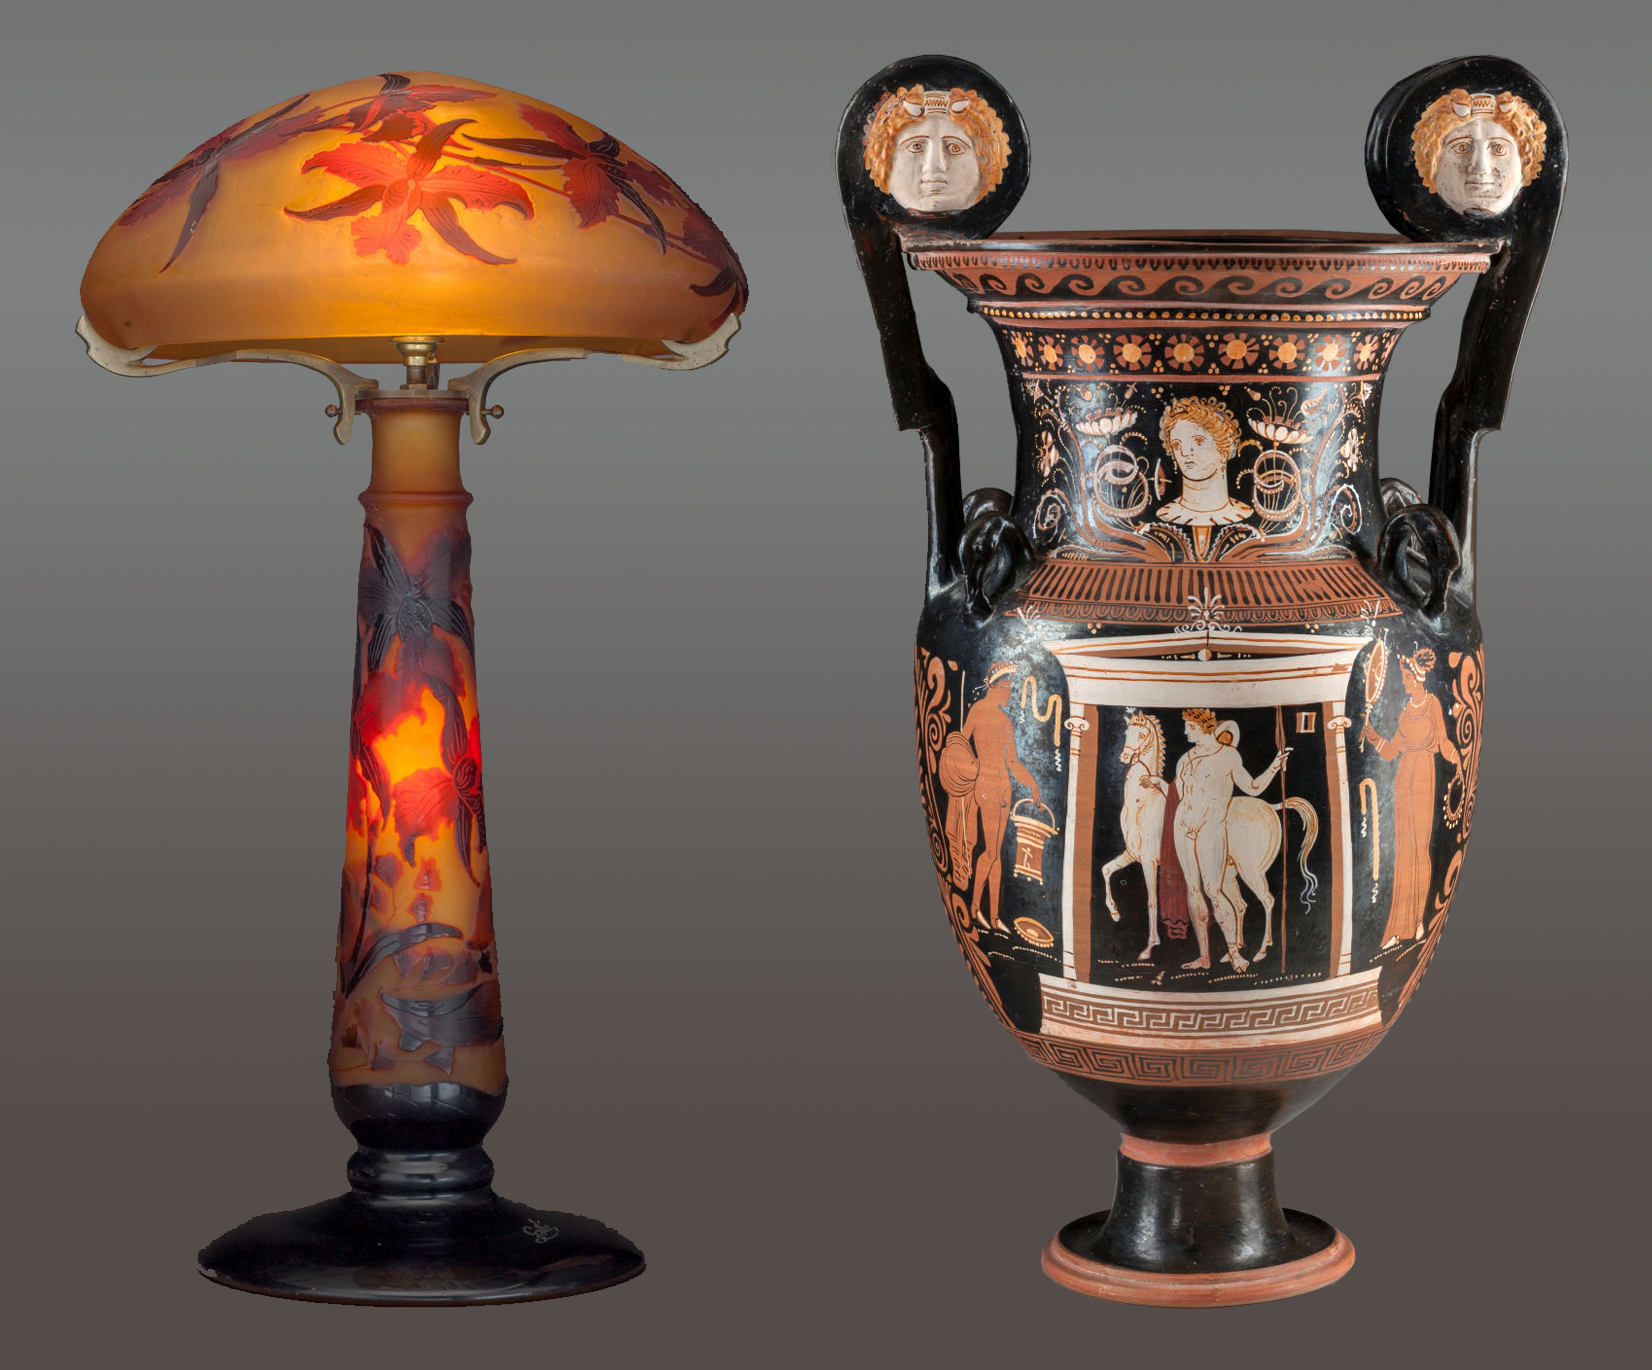 Gallé overlay glass Iris study lamp (left), circa 1900, shade and base marked, 22 inches high (est. $40,000-$60,000) and an Apulian red-figured volute-krater, attributed to the Group of Copenhagen 4223, circa 340-320 B.C., 27-1/2 inches high (est.: $35,000-$45,000). Heritage Auctions images